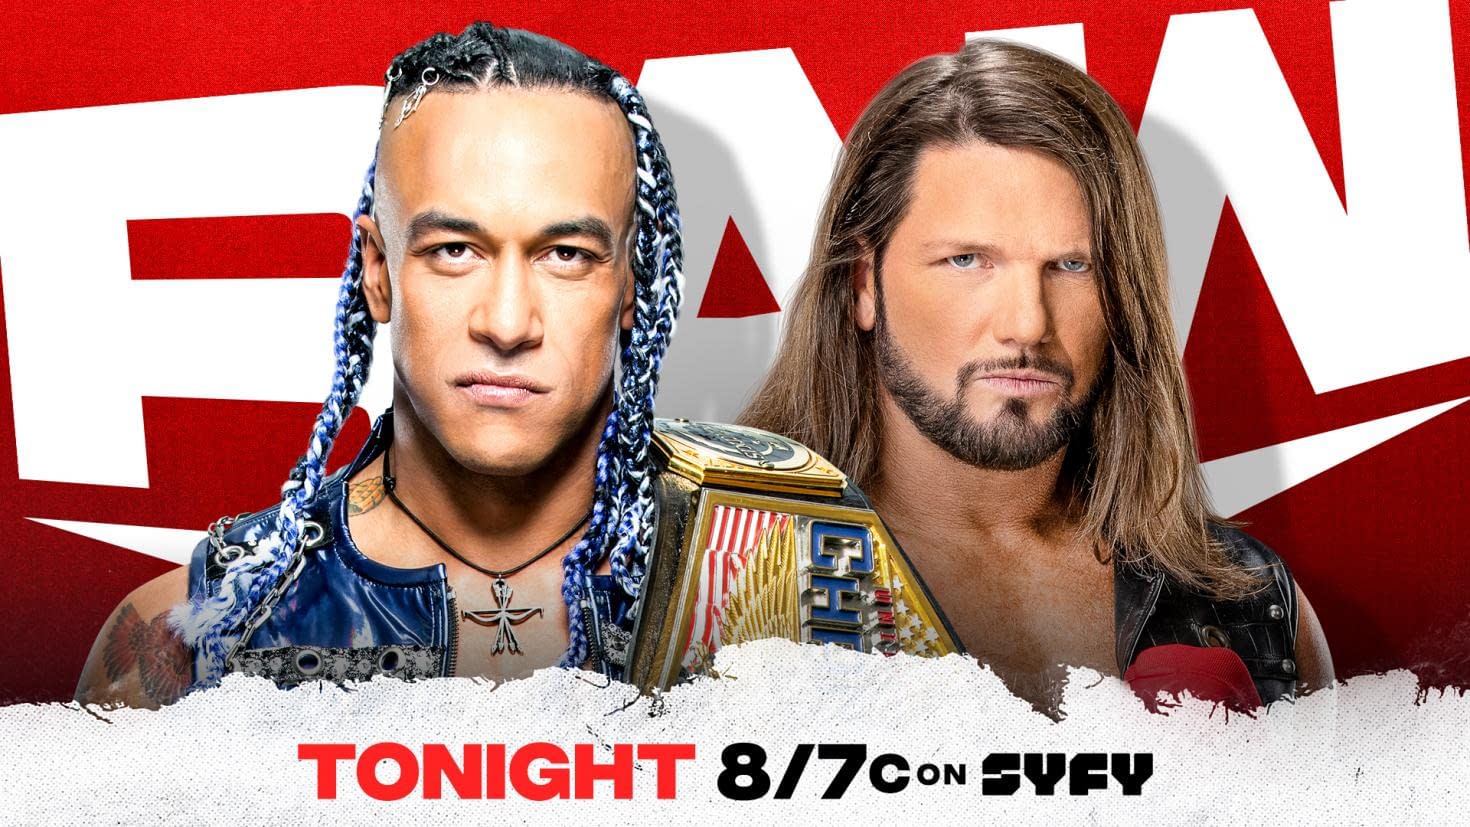 Final WWE Raw Before EC PPV to Feature US Title Match, Toga Party